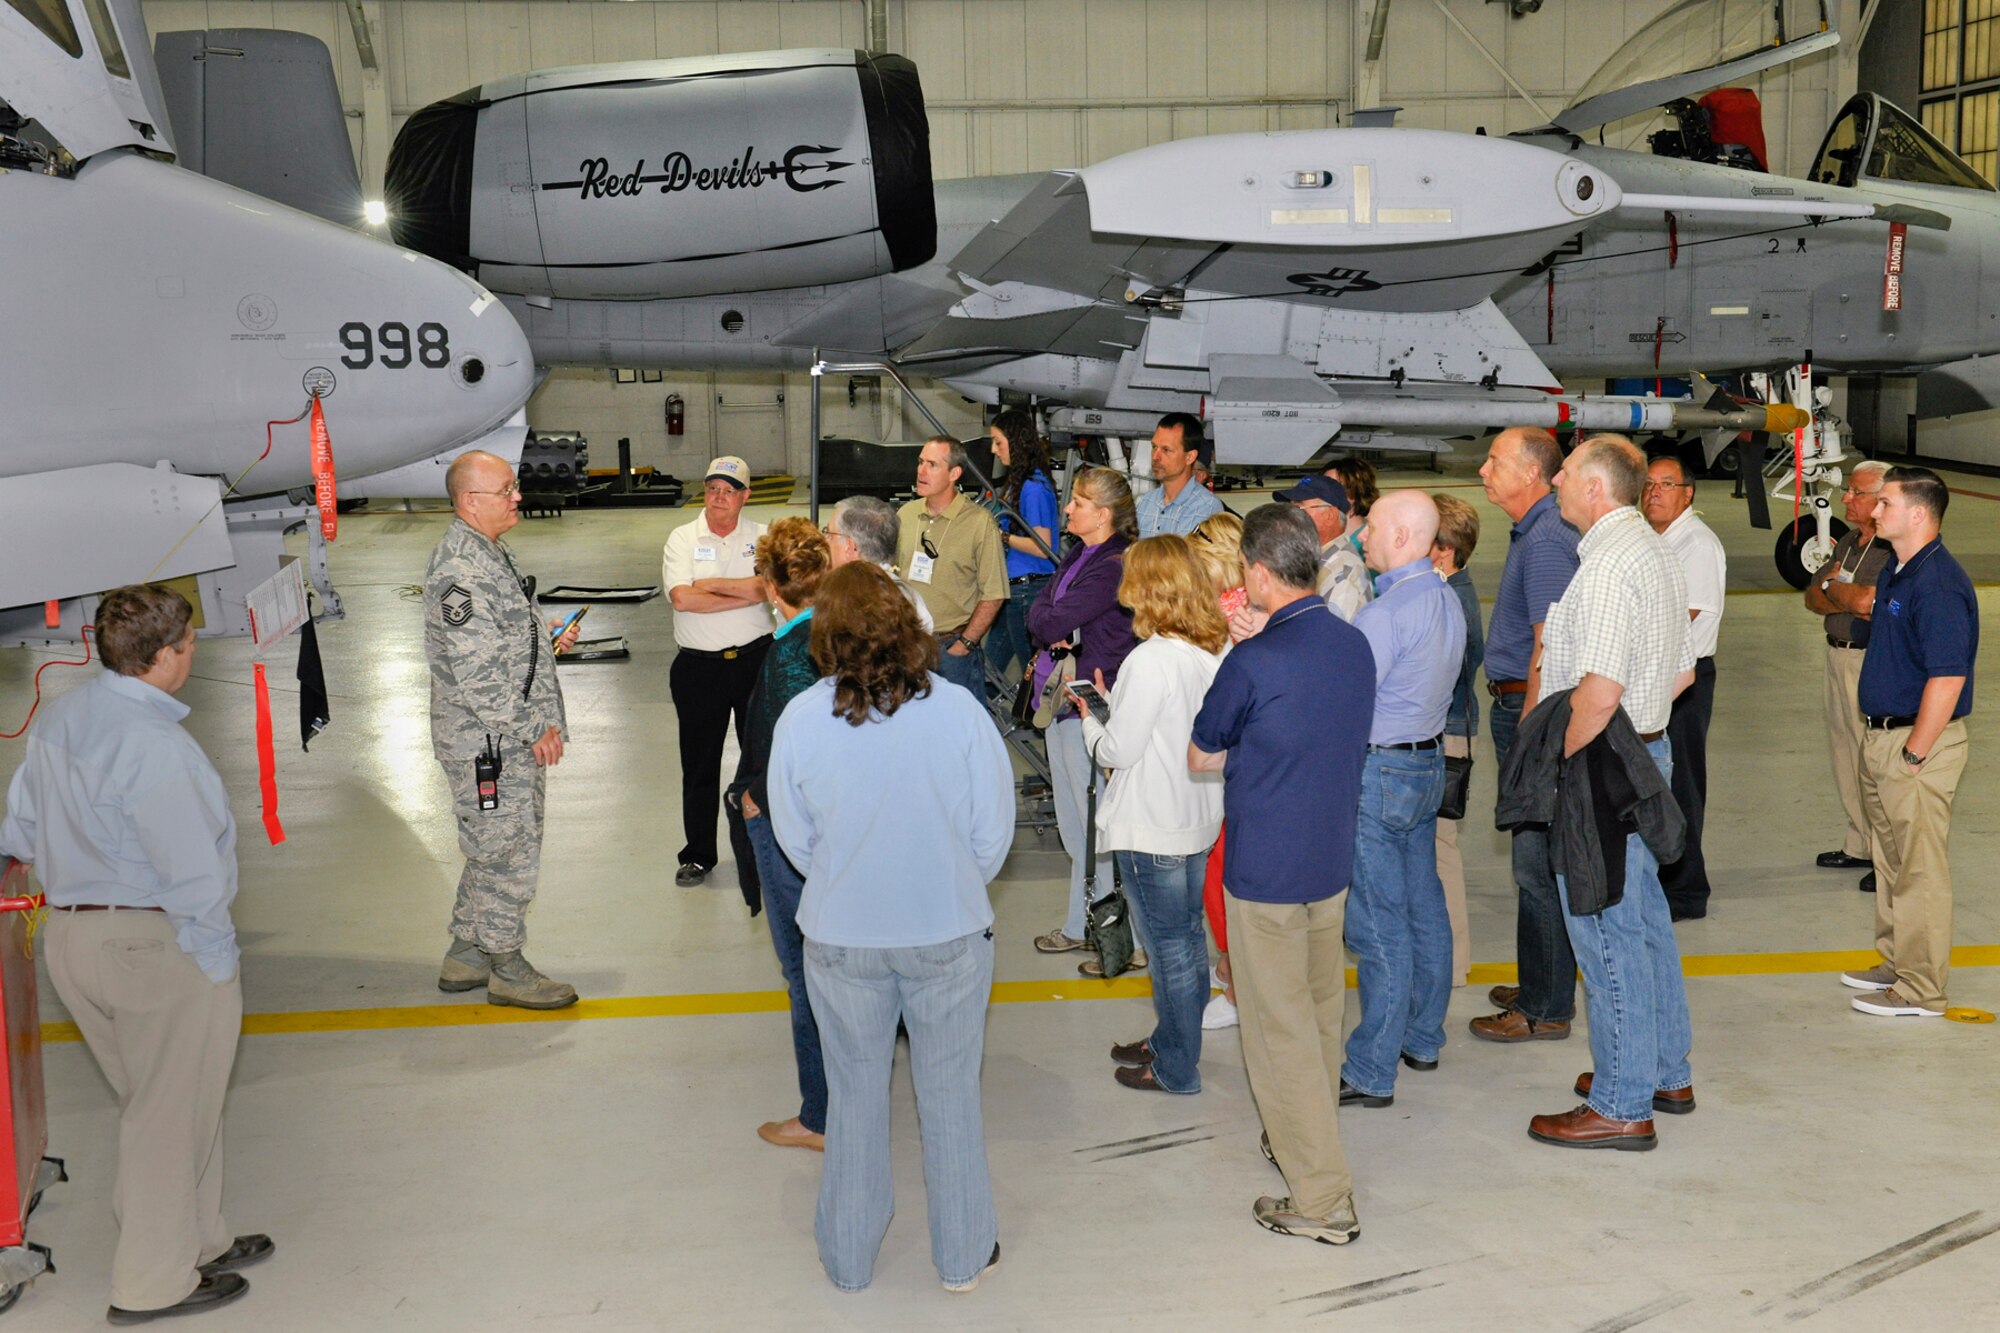 The Employer Support of the Guard & Reserve organization brought together employers from around the stateof Michigan to Selfridge Air National Guard Base June 12-13, 2014, for two-days of tours, briefings and interactions with military personnel assigned here.  One of the benefits of holding the ESGR tour at Selfridge is the fact that all five military services - Air Force, Army, Navy, Marine Corps, Coast Guard - have operations at the base.  ESGR, a Department of Defense office, was established in 1972 to promote cooperation and understanding between Reserve Component Service members and their civilian employers and to assist in the resolution of conflicts arising from an employee's military commitment. The group is shown here with 127th Wing  A-10 Thunderbolt II aircraft which are flown by the 107th Fighter Squadron.  (US Air National Guard photo by Terry Atwell)